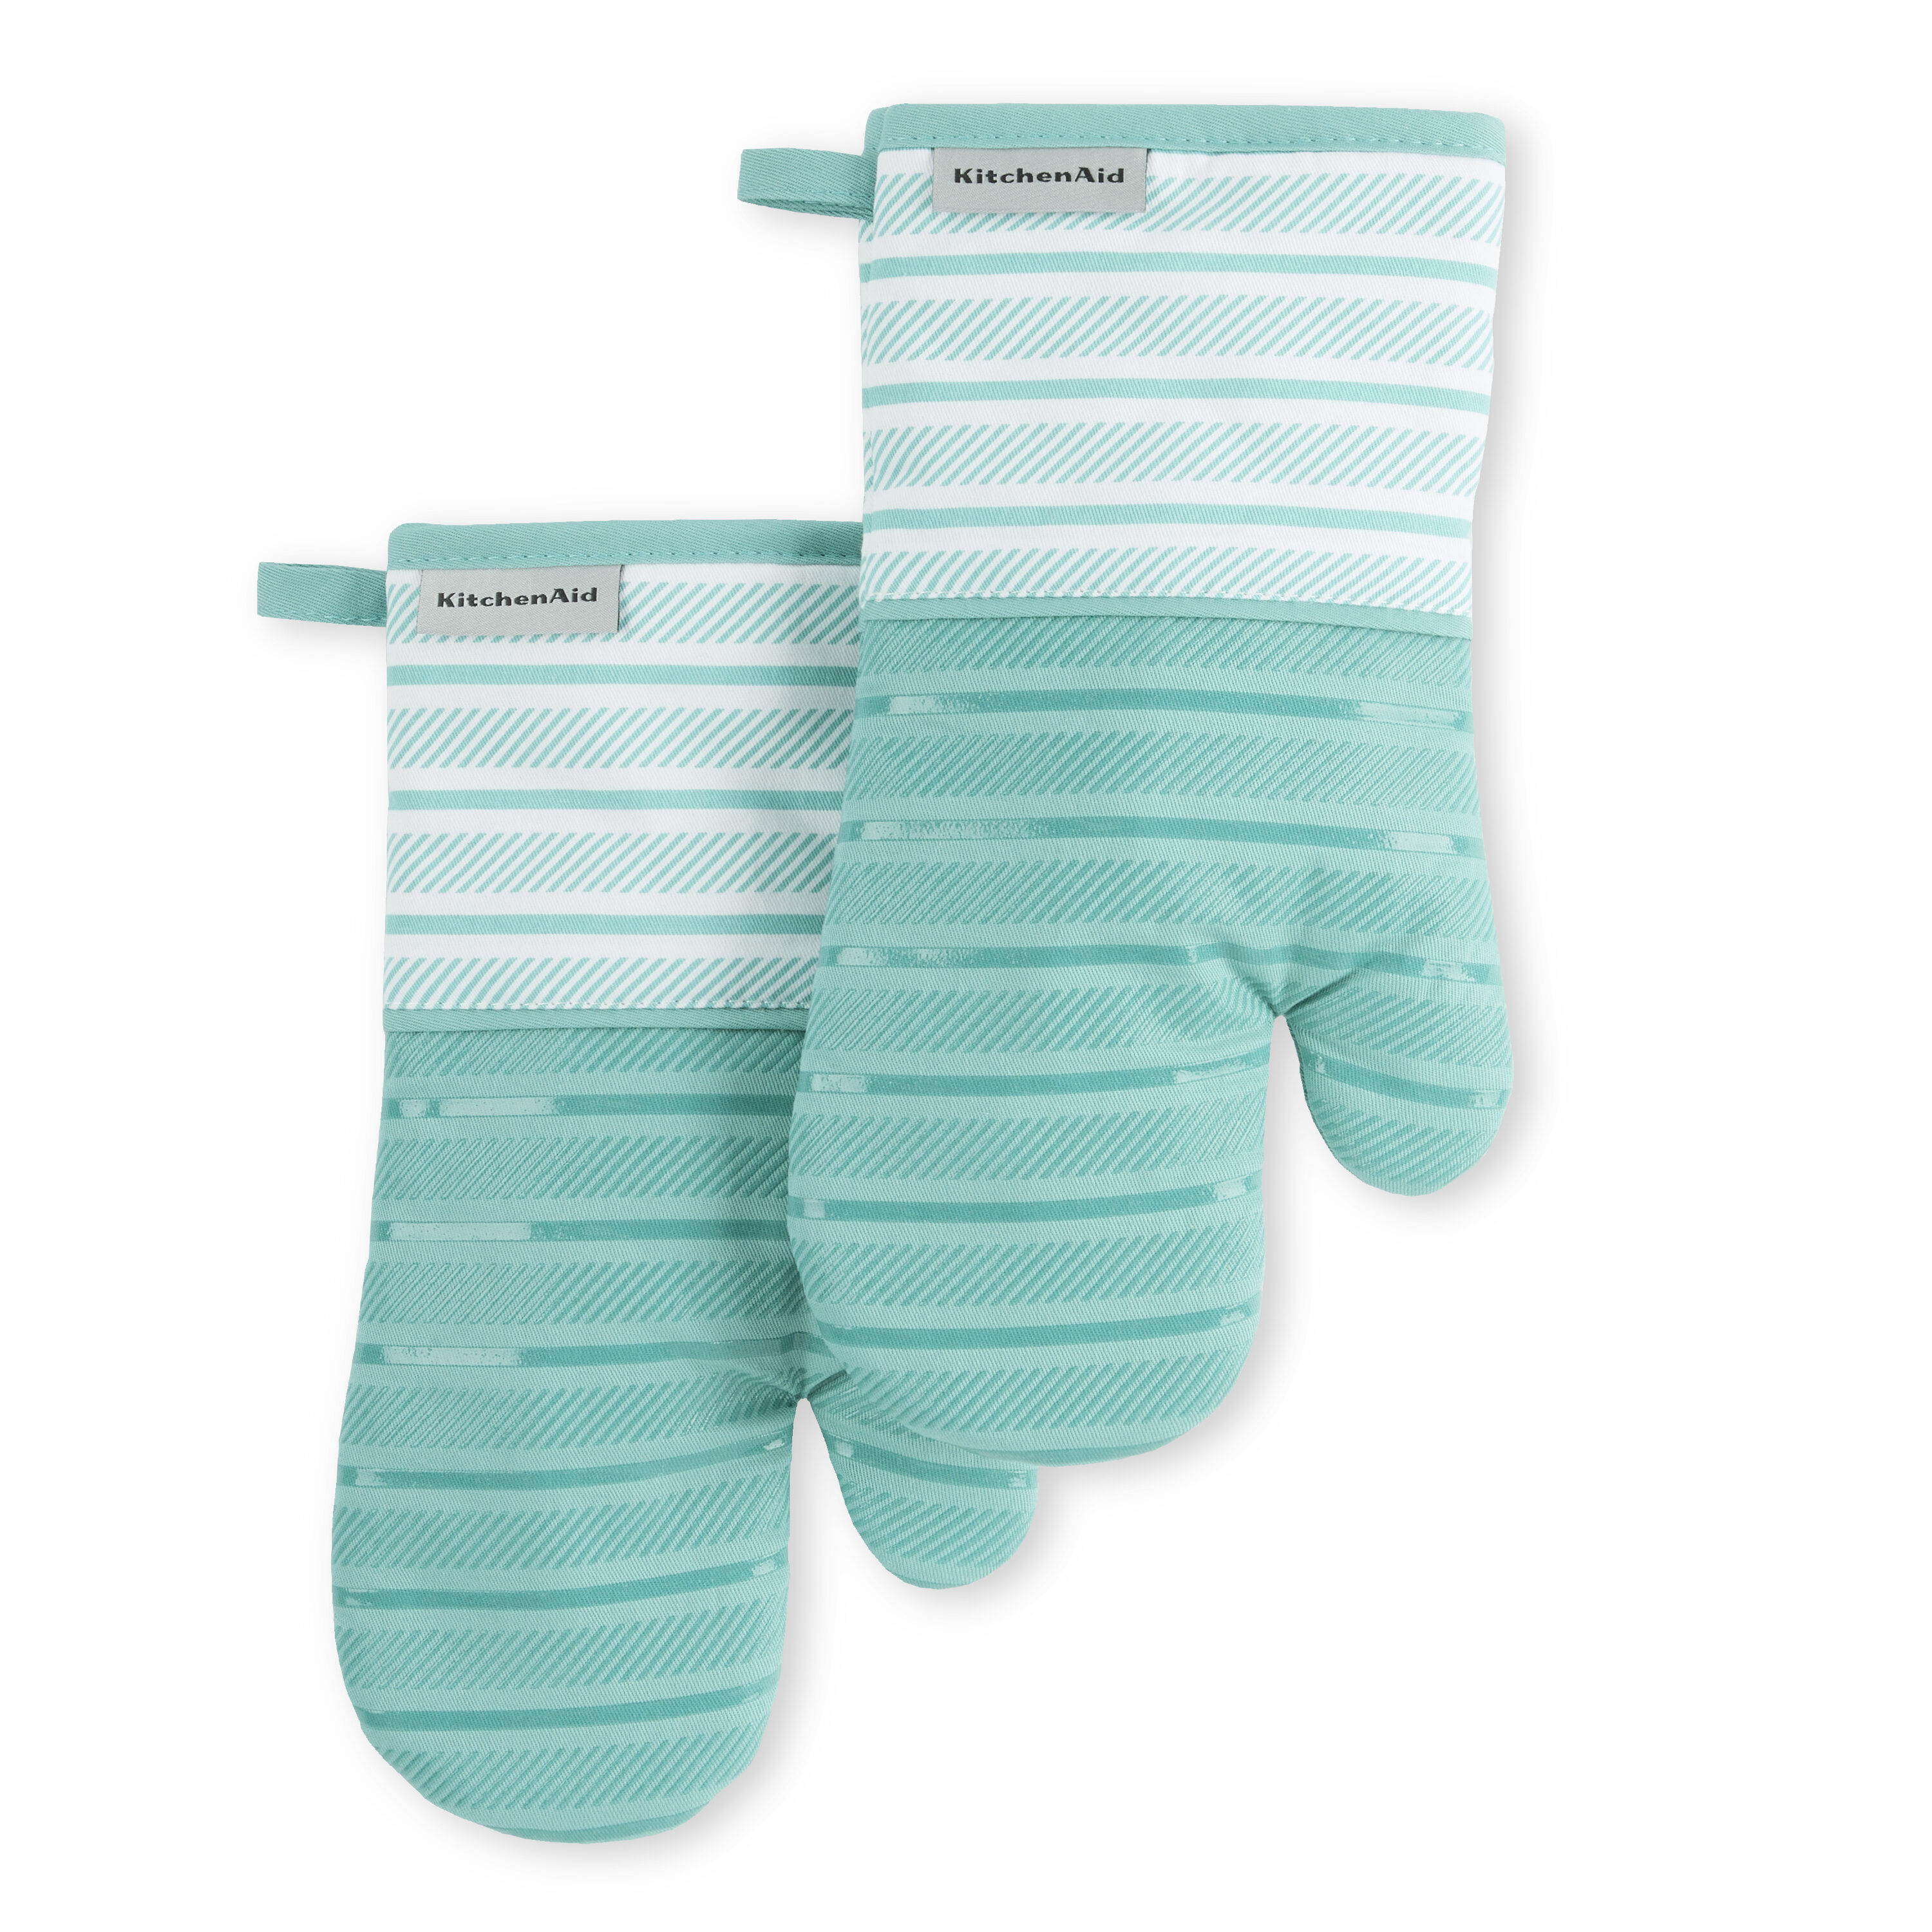 KitchenAid Aqua Sky Cotton Oven Mitt Set - Durable and Heat Resistant -  Slip-Resistant Silicone Grip - Set of 2 Albany Mitts - 7.25x13 Inches in  the Kitchen Towels department at